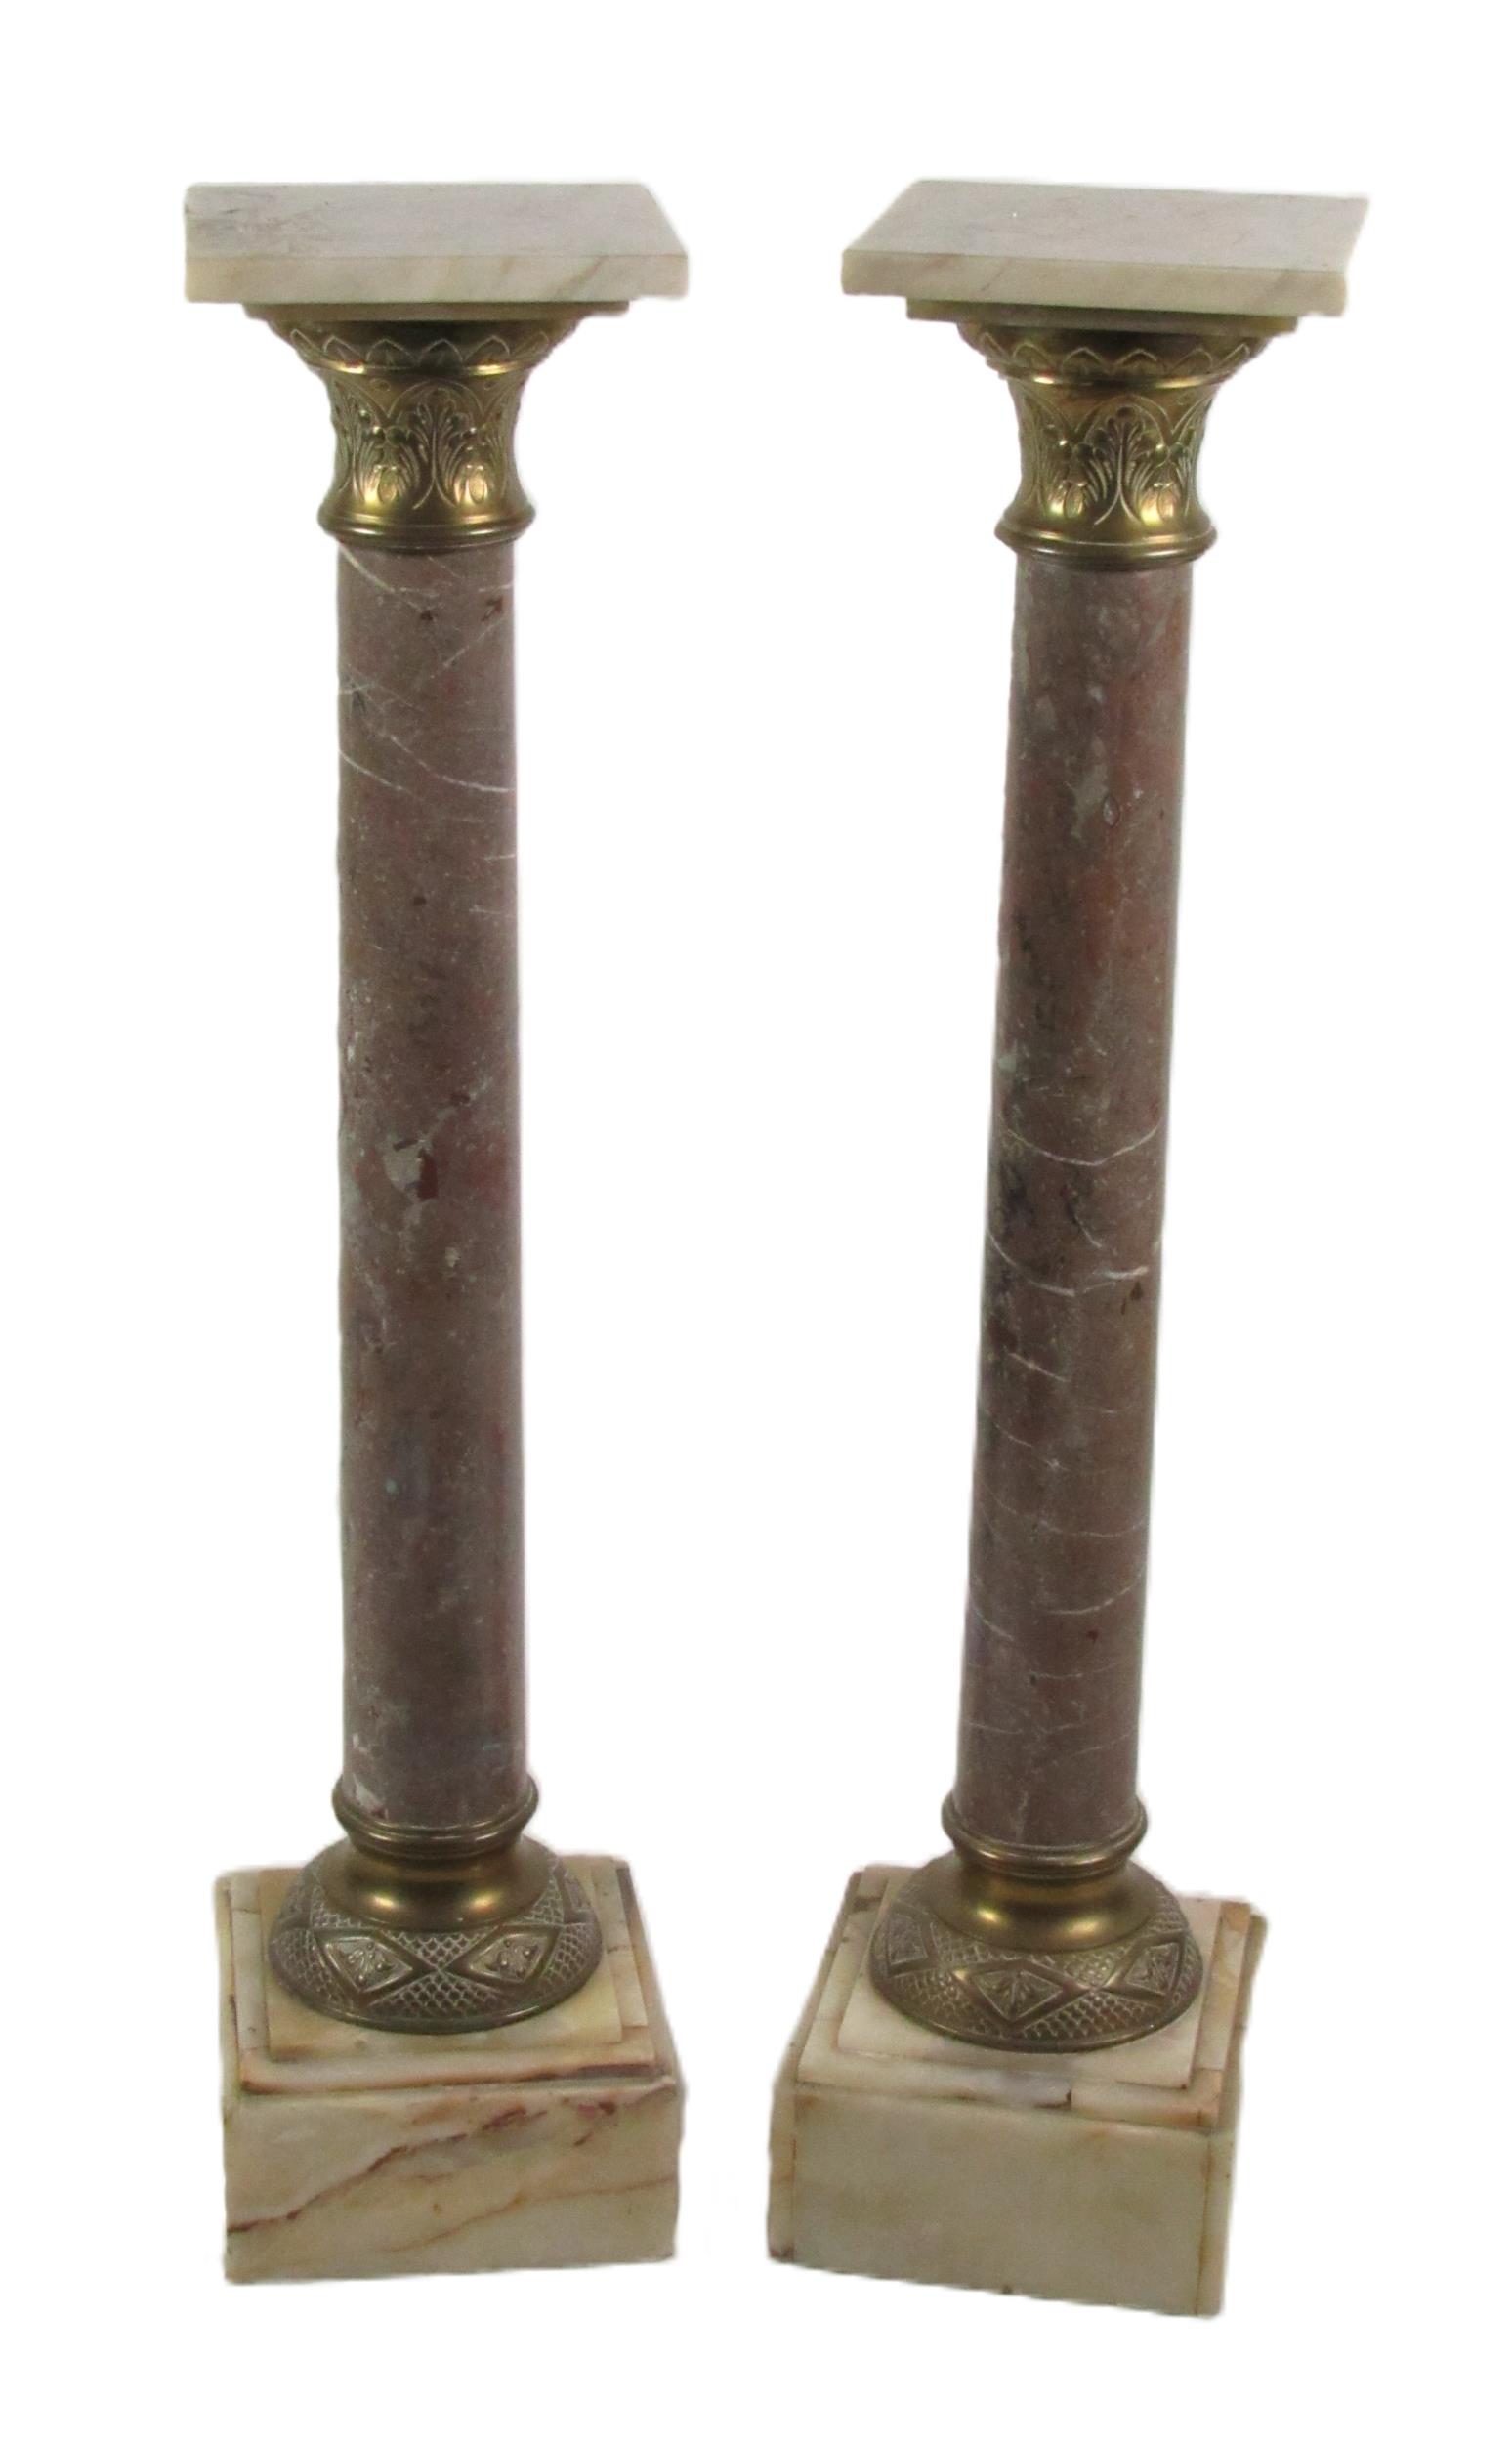 A pair of square top pedestal marble Columns, each with square platform tops, ormolu capitals and